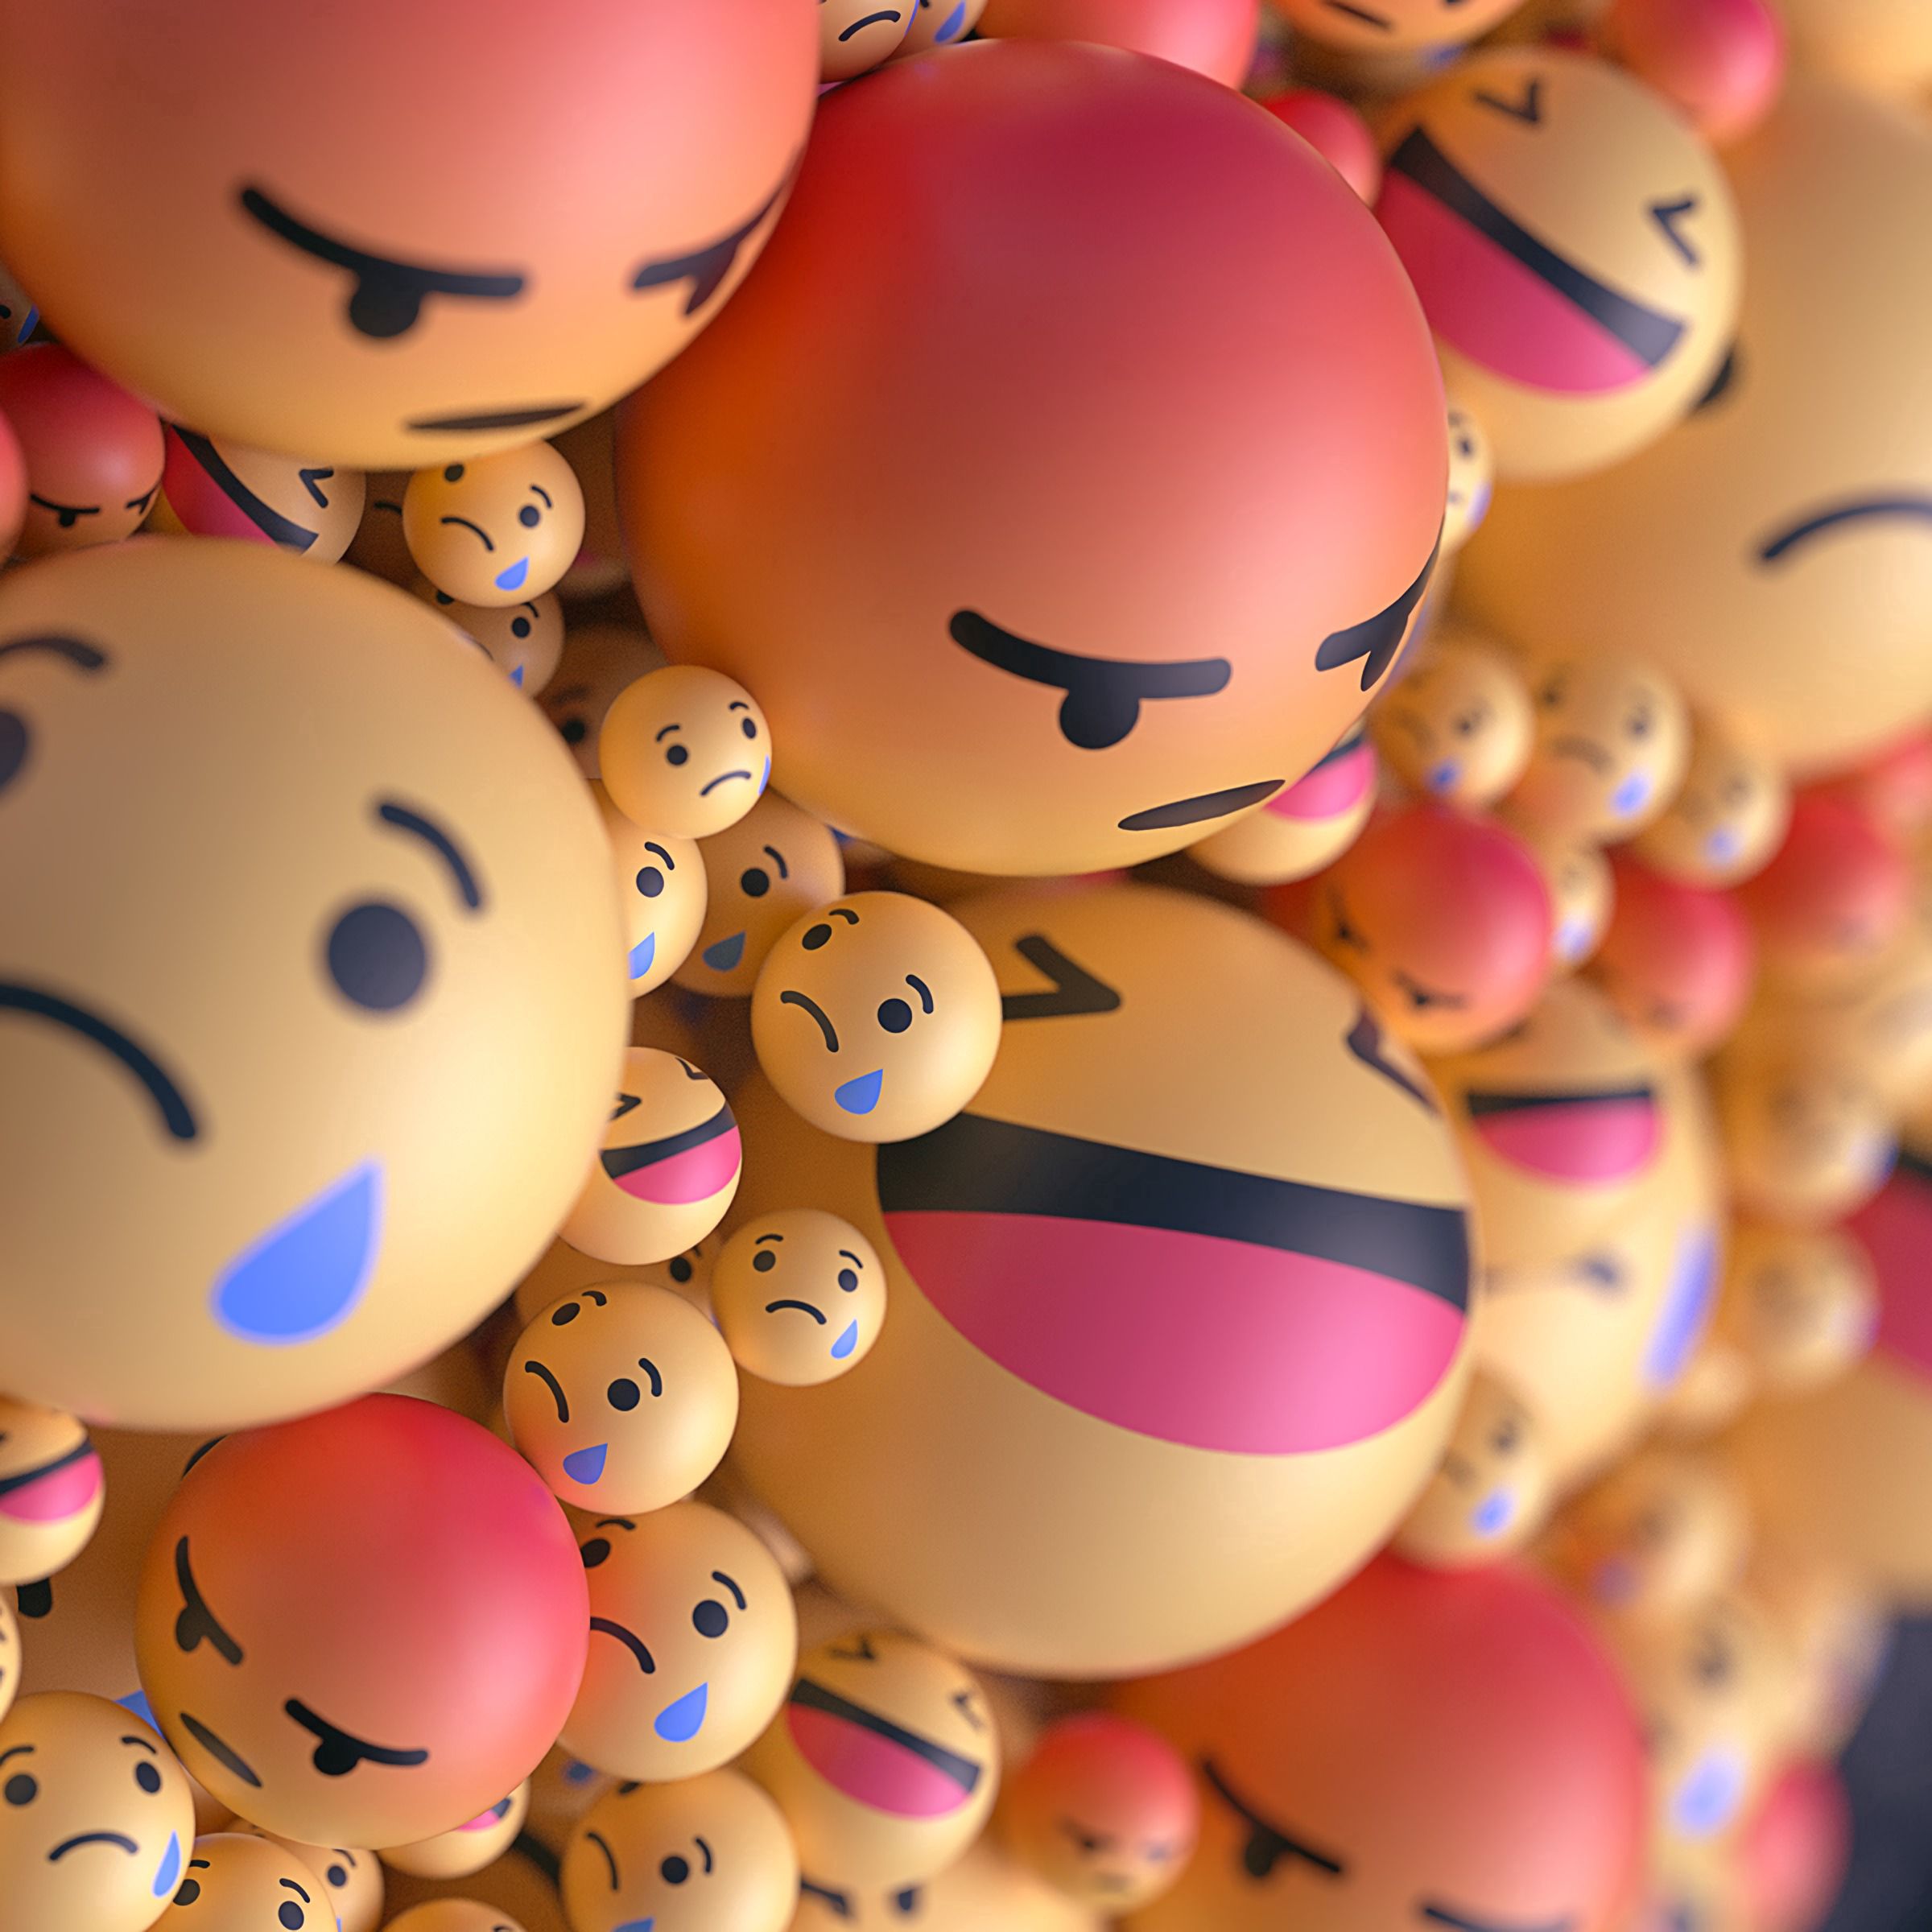 3d, smiles, smileys, balloons, emoticons, taw, smilies, emotions